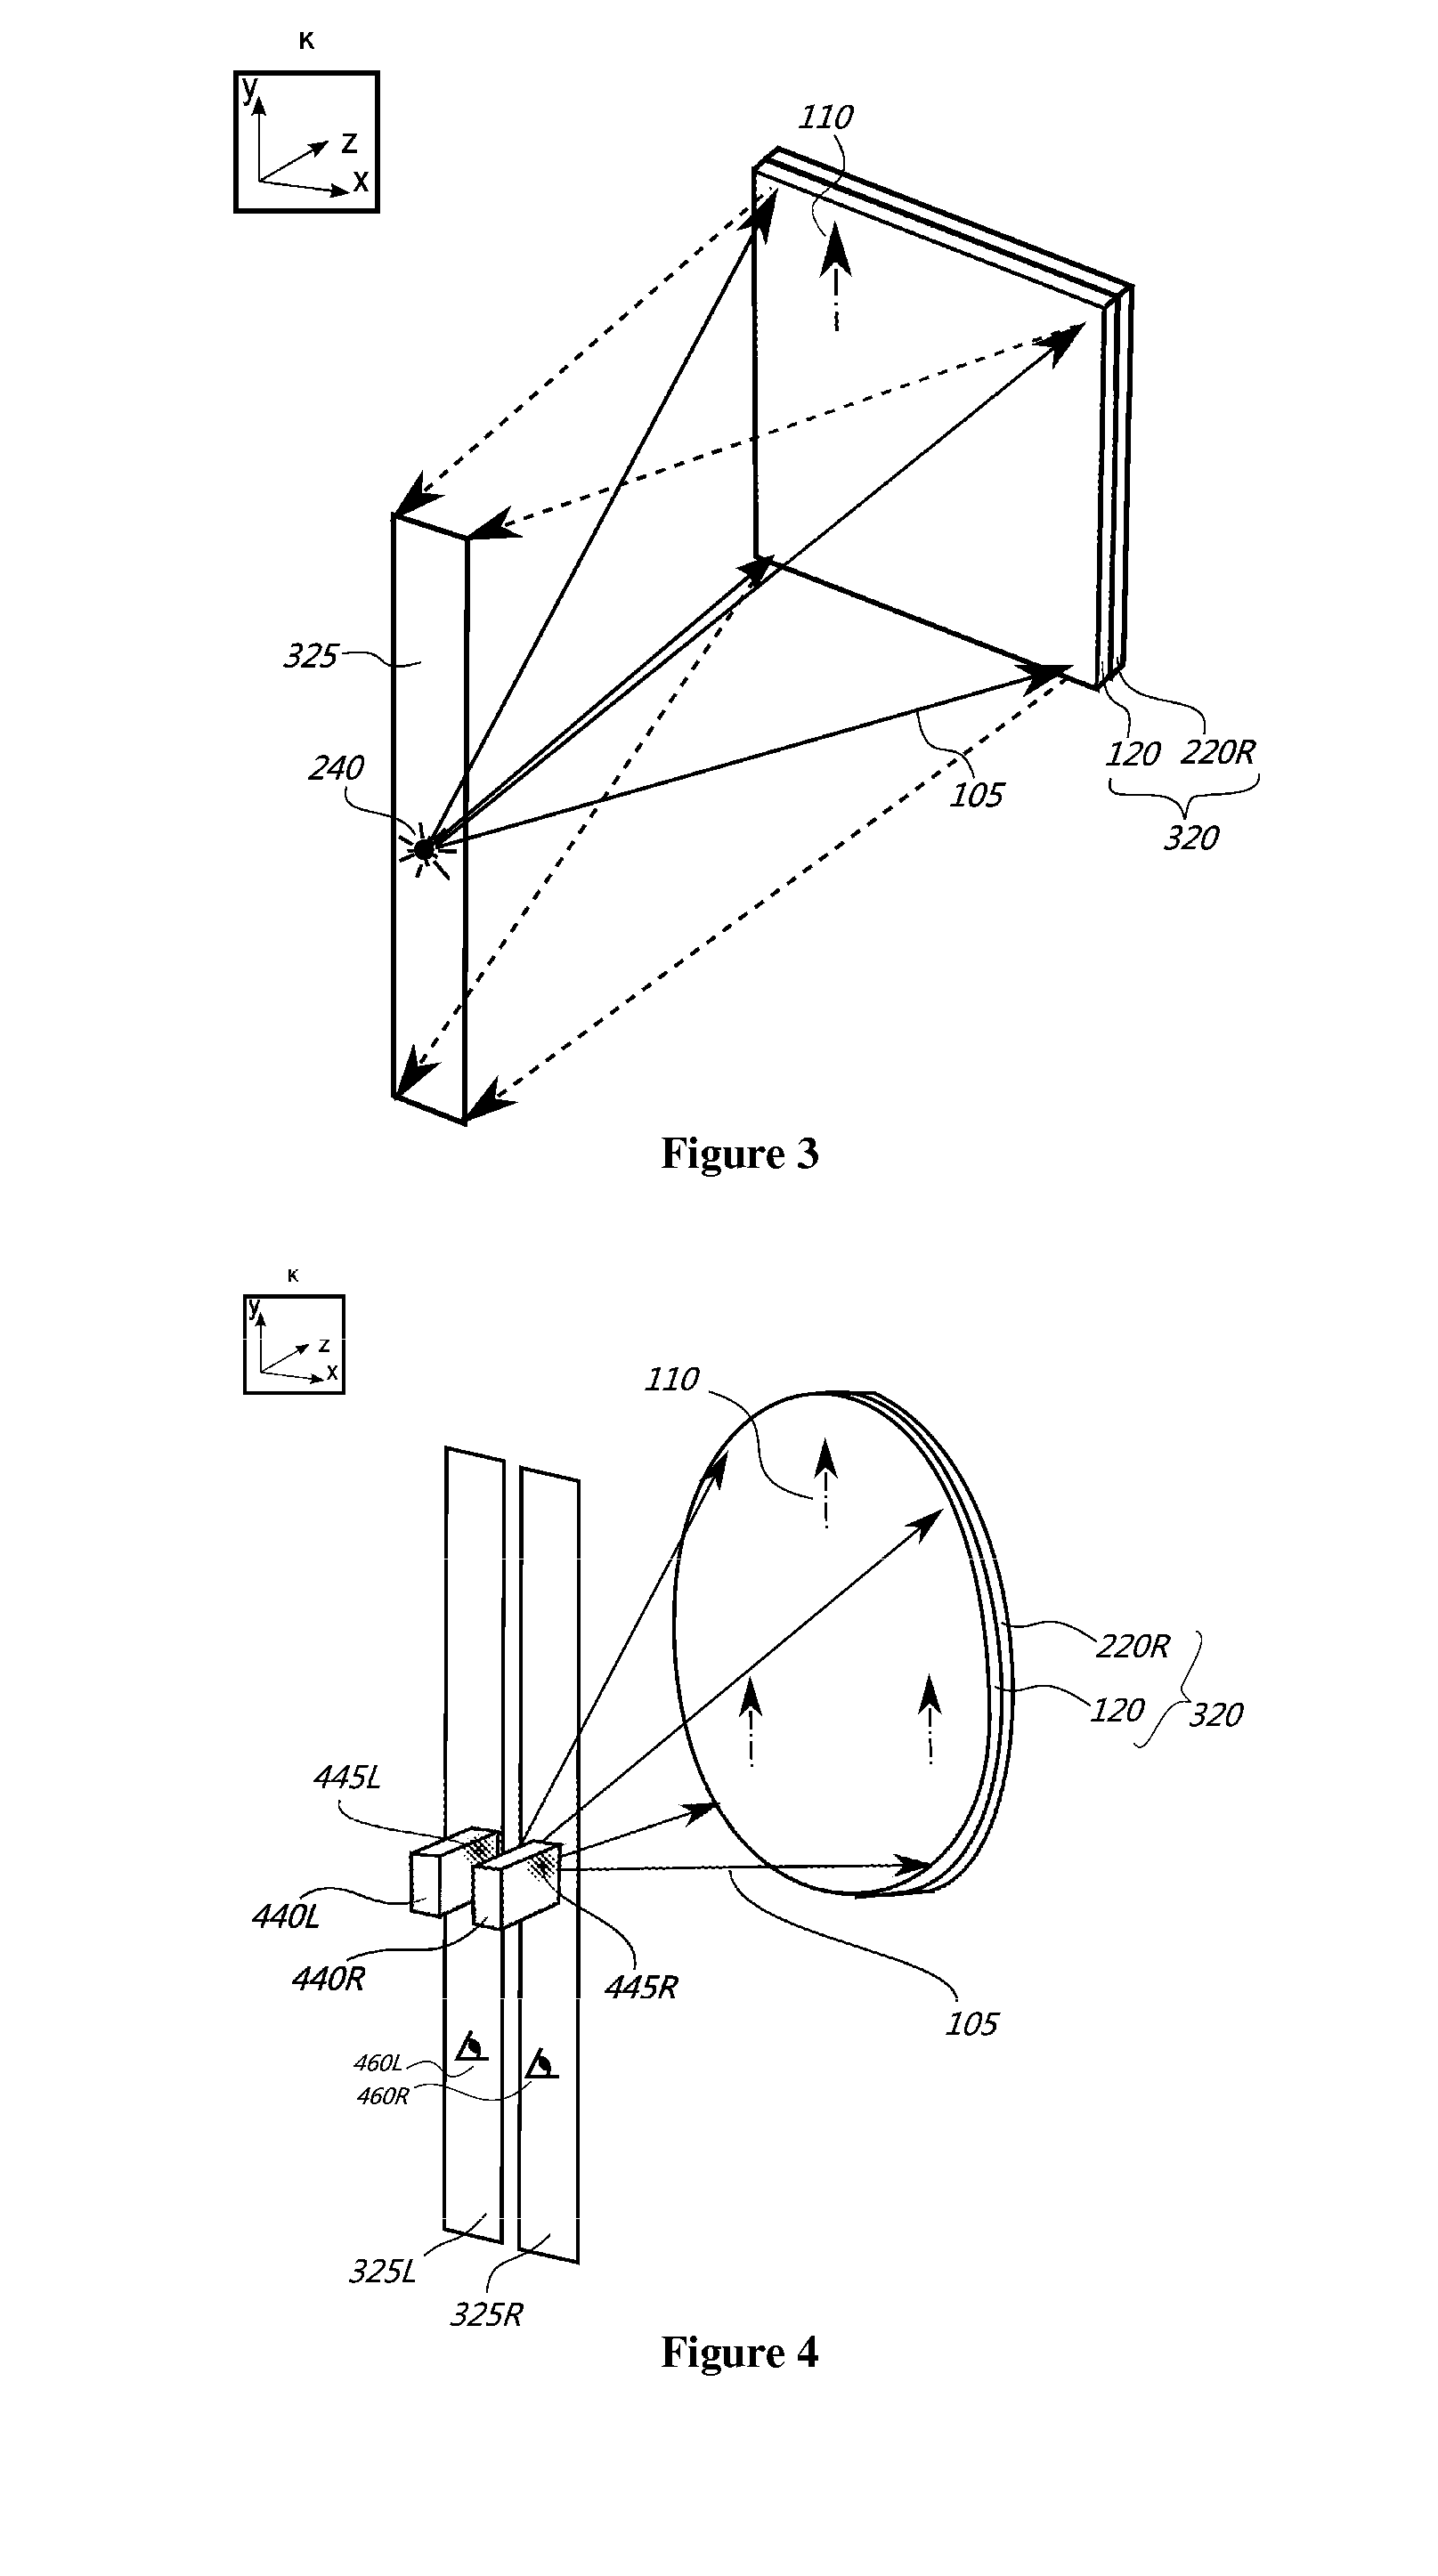 Method for autostereoscopic projection displays